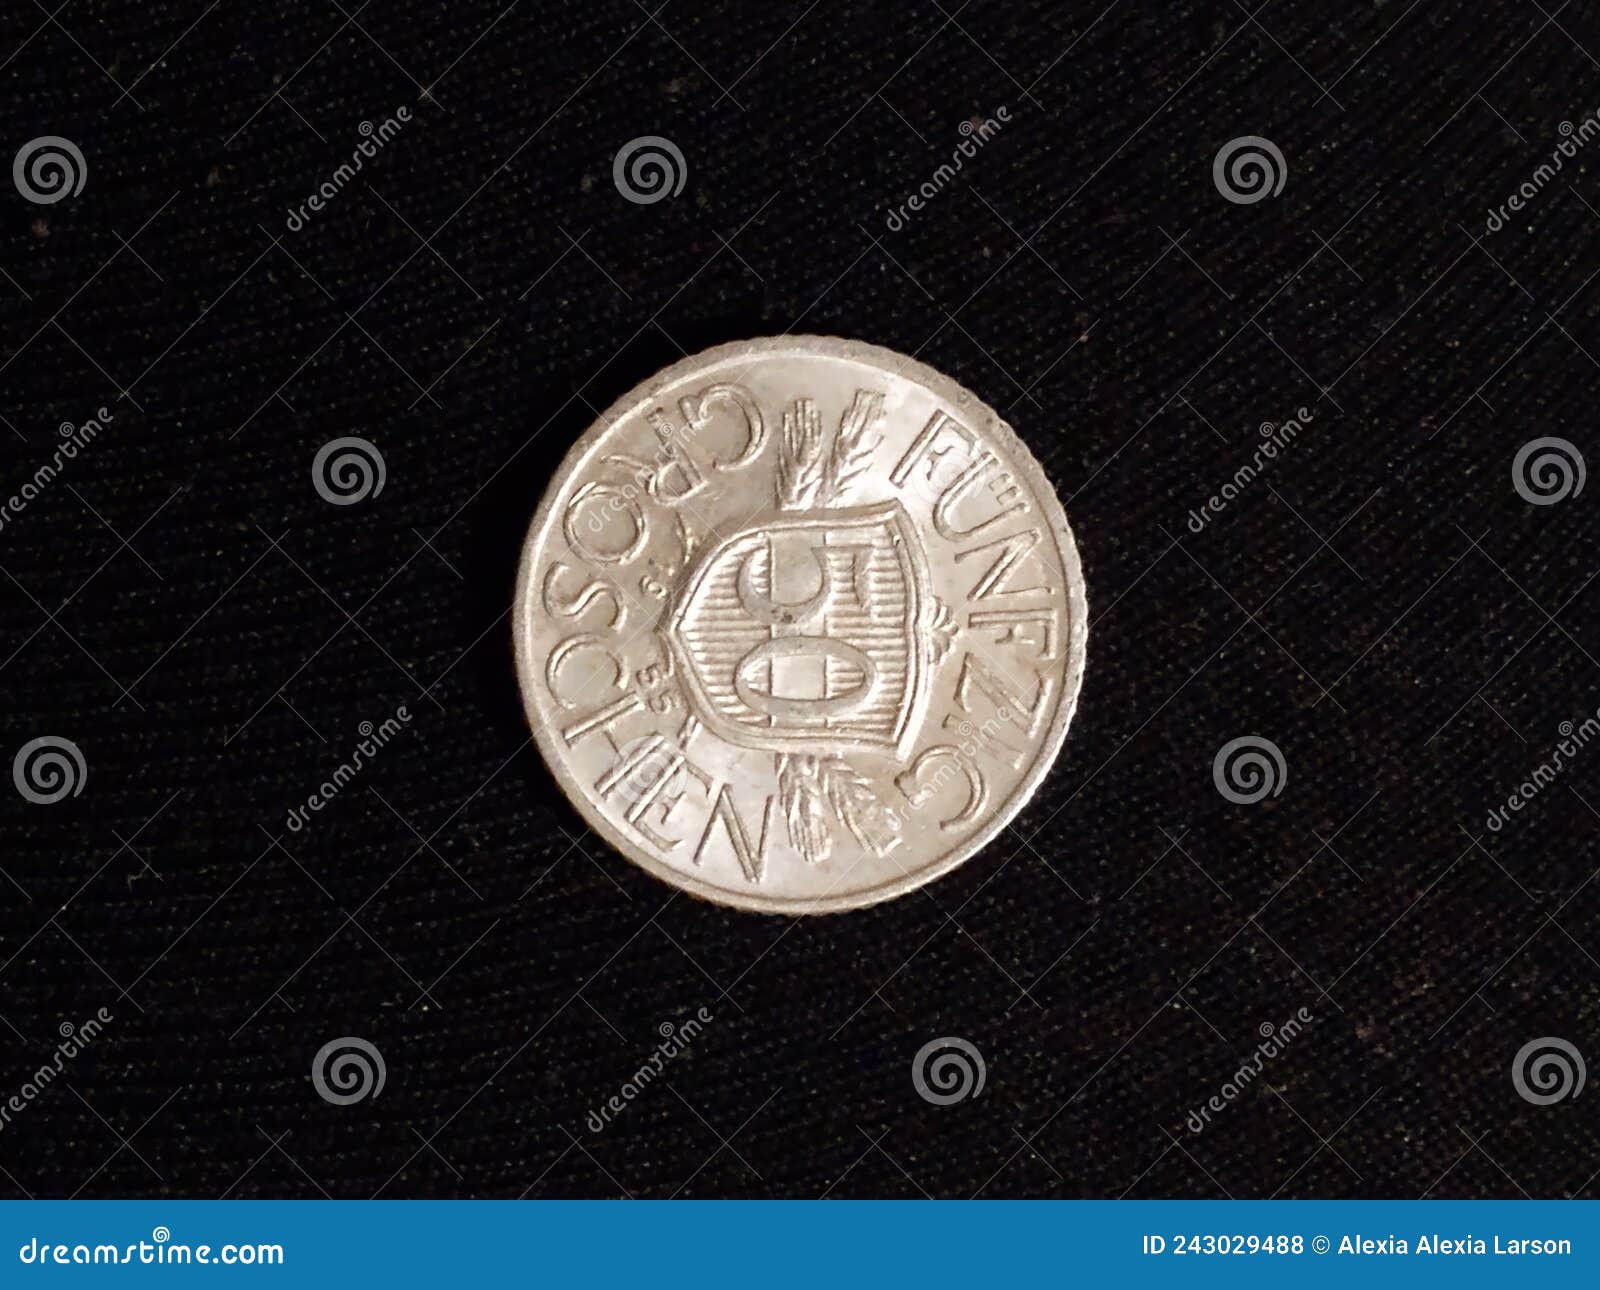 old collectable coin